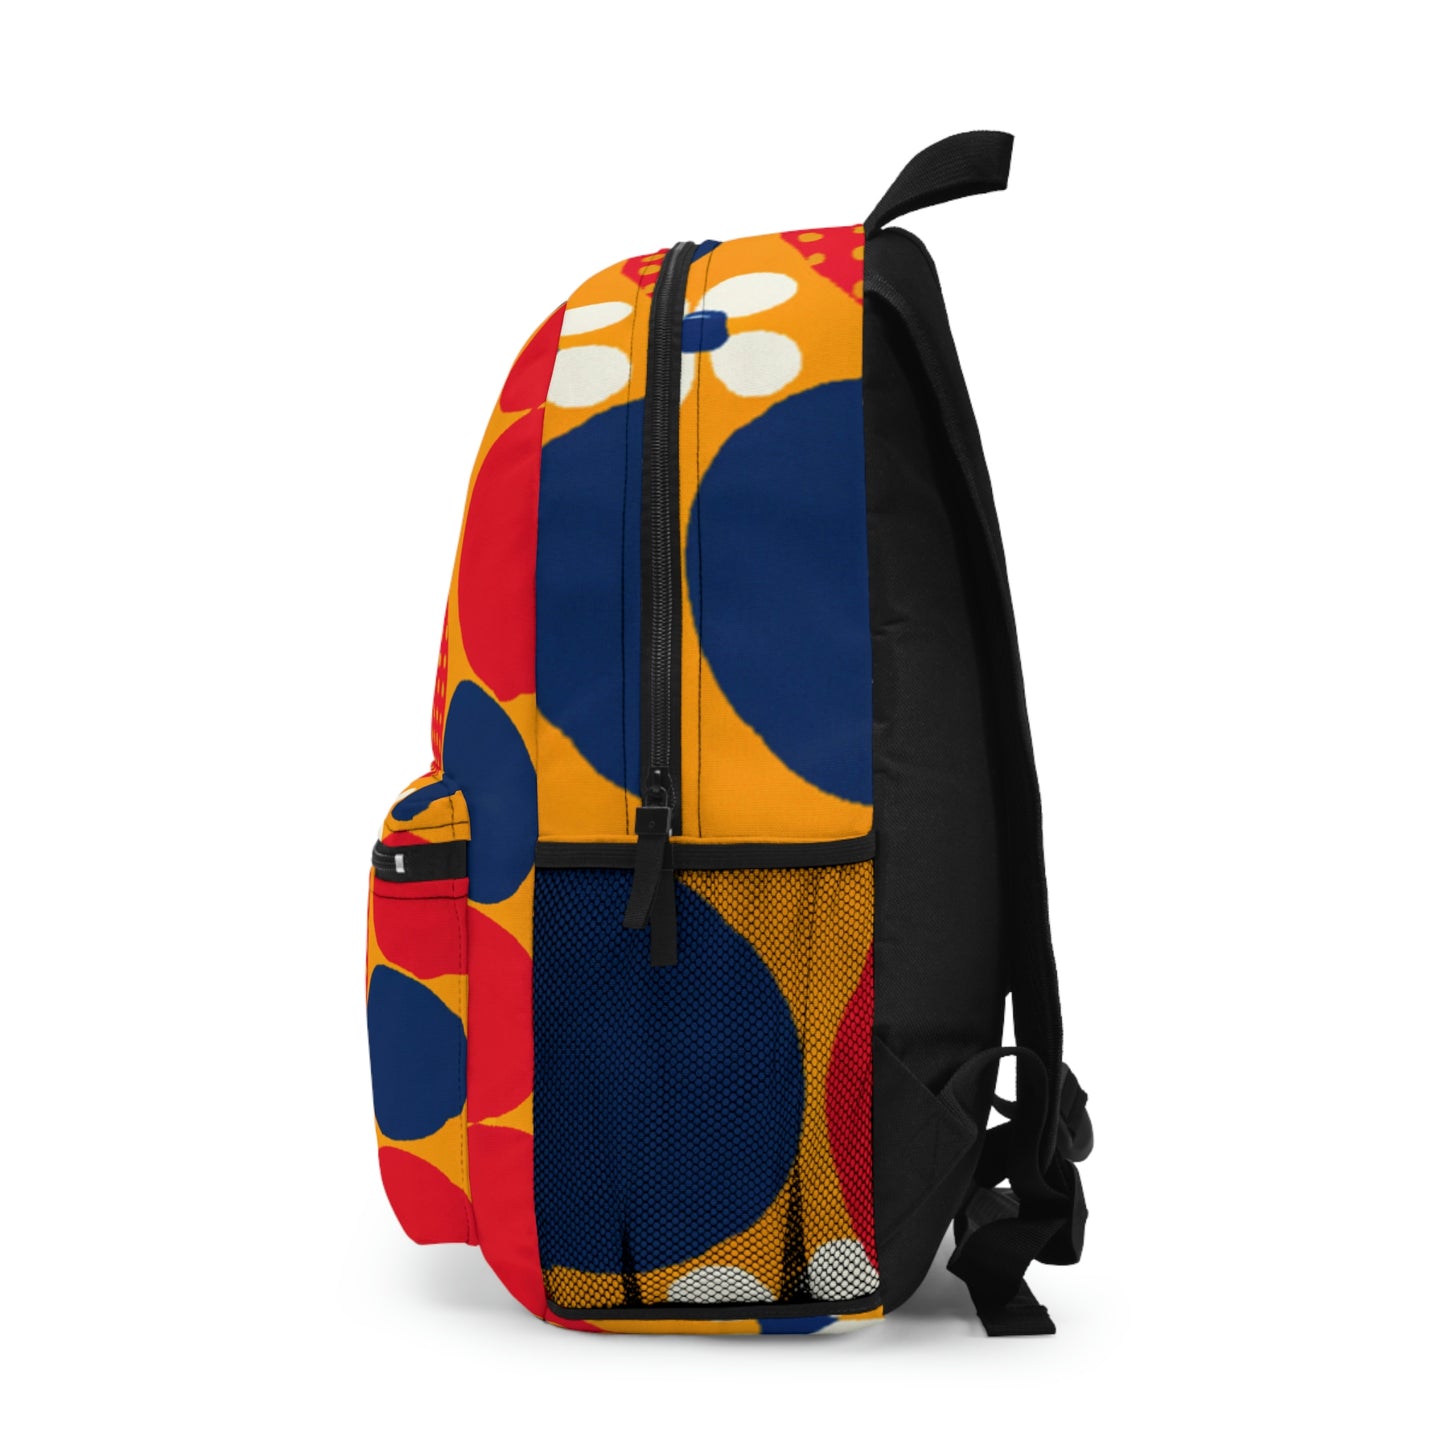 Pablo PicabArt Backpack